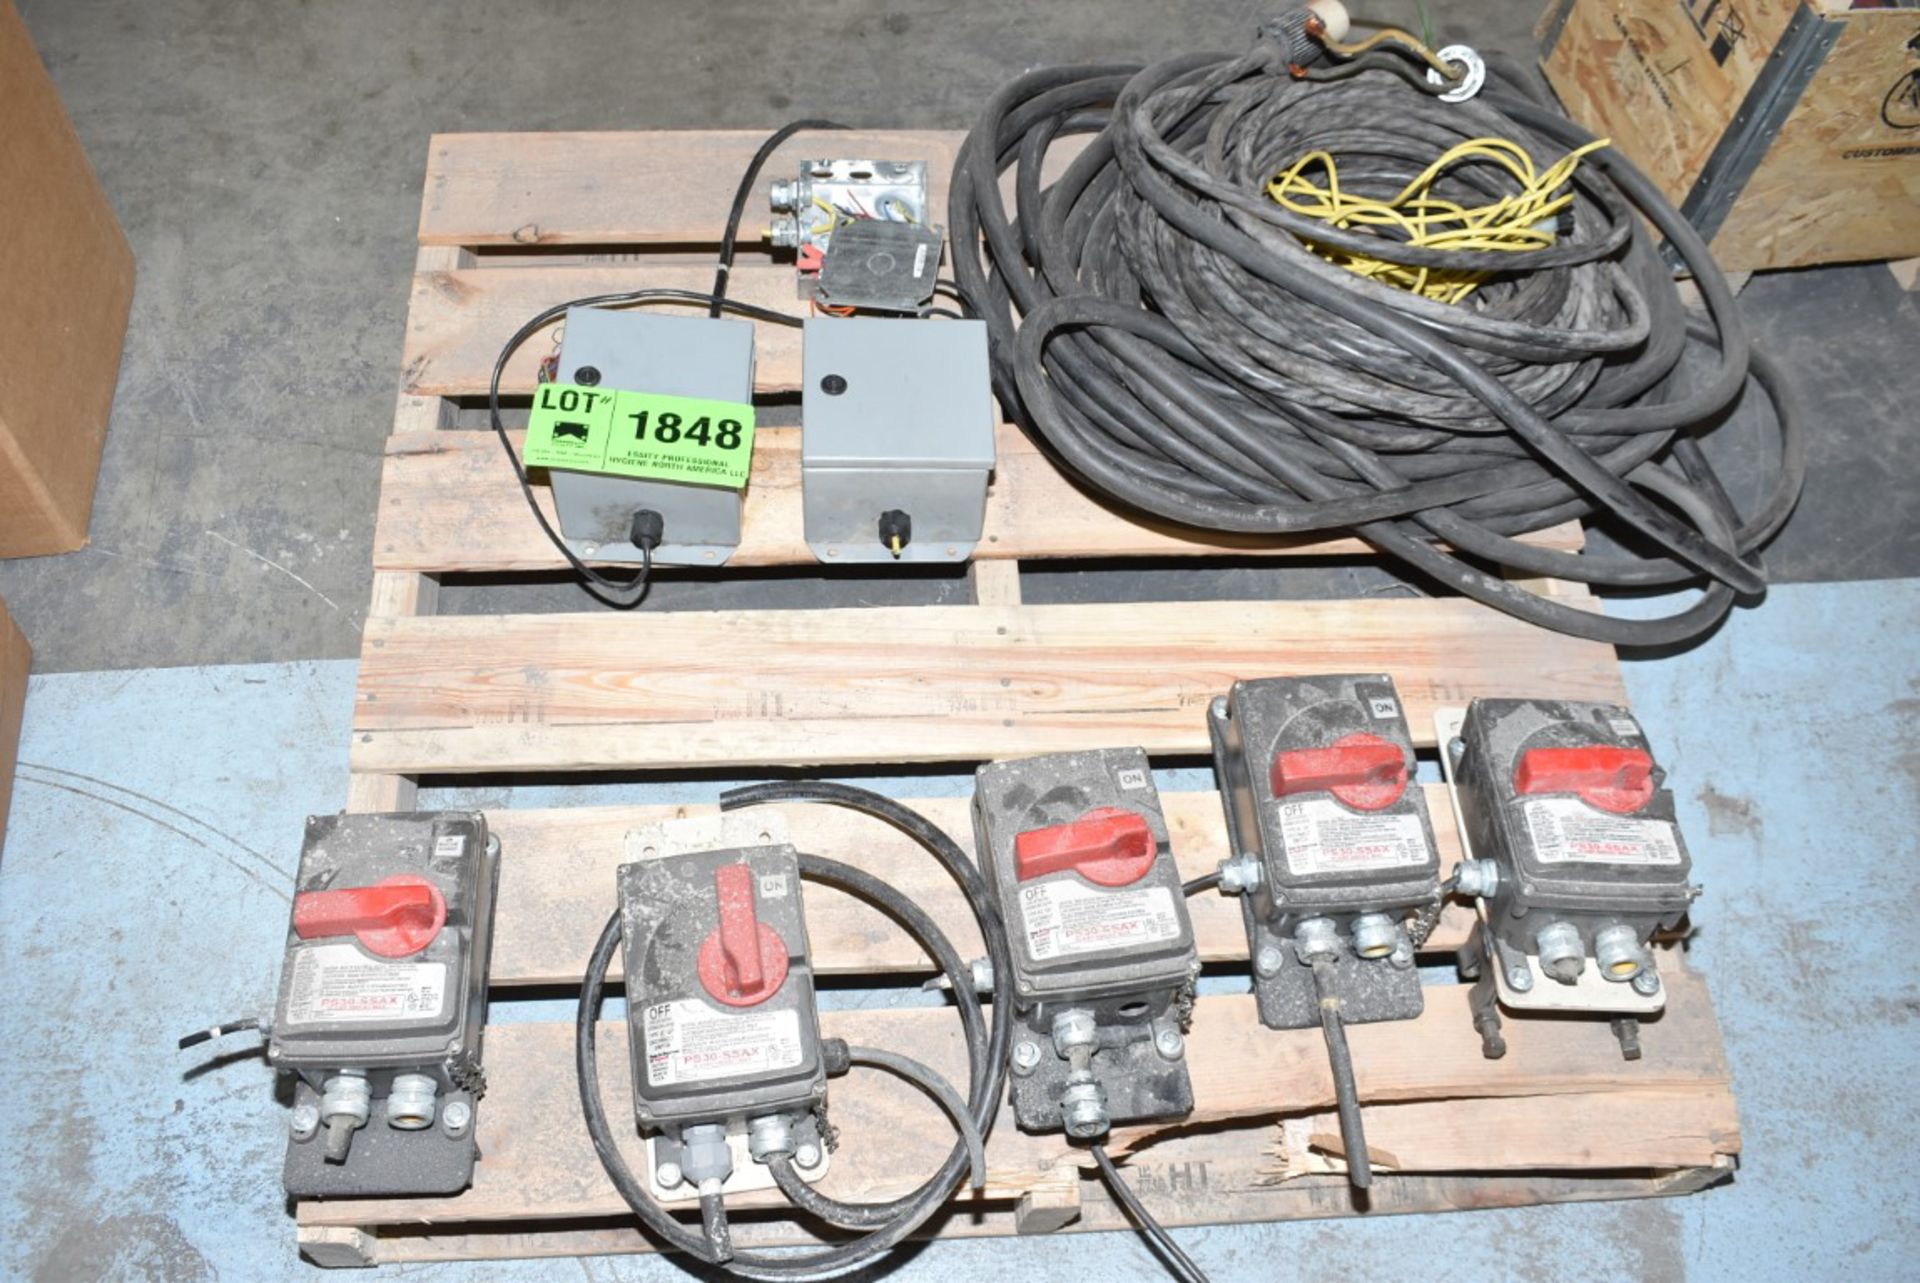 LOT/ SKID WITH ELECTRICAL COMPONENTS - INCLUDING HEAVY DUTY POWER SWITCHES, ELECTRICAL CABLE [